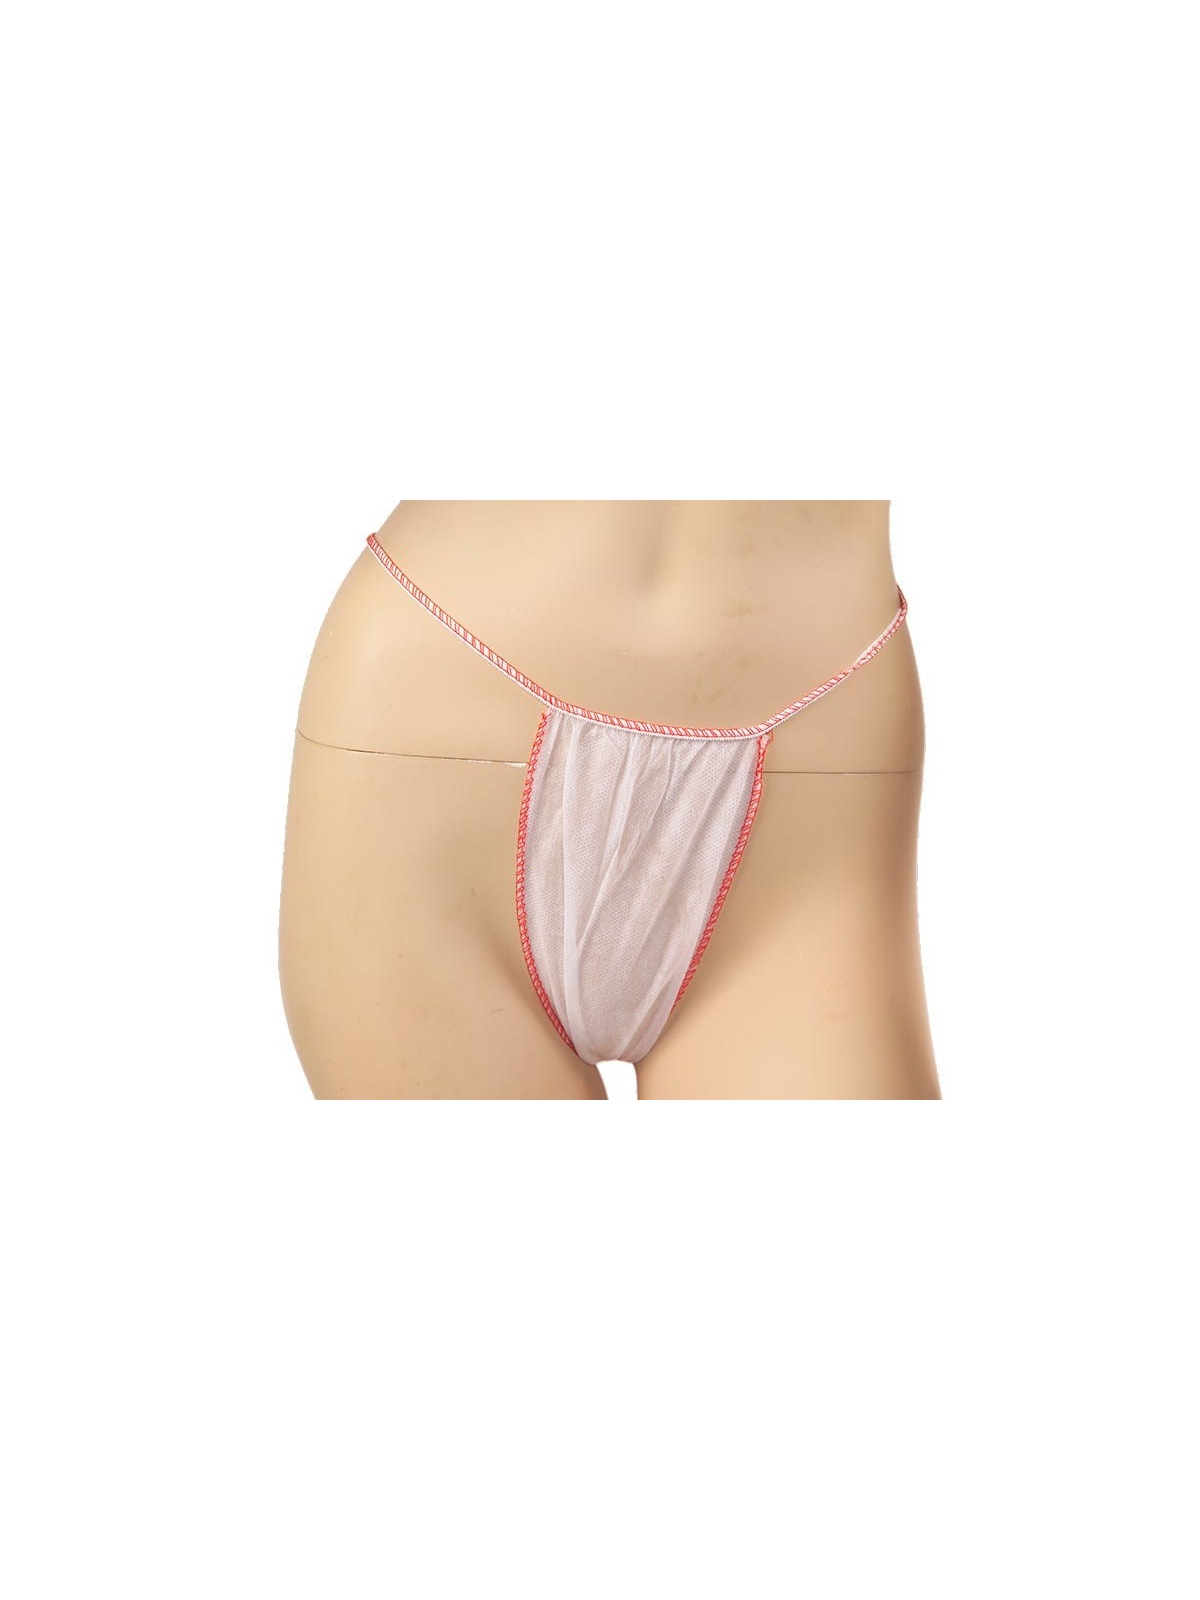 Tanga desechable mujer (100 unds)